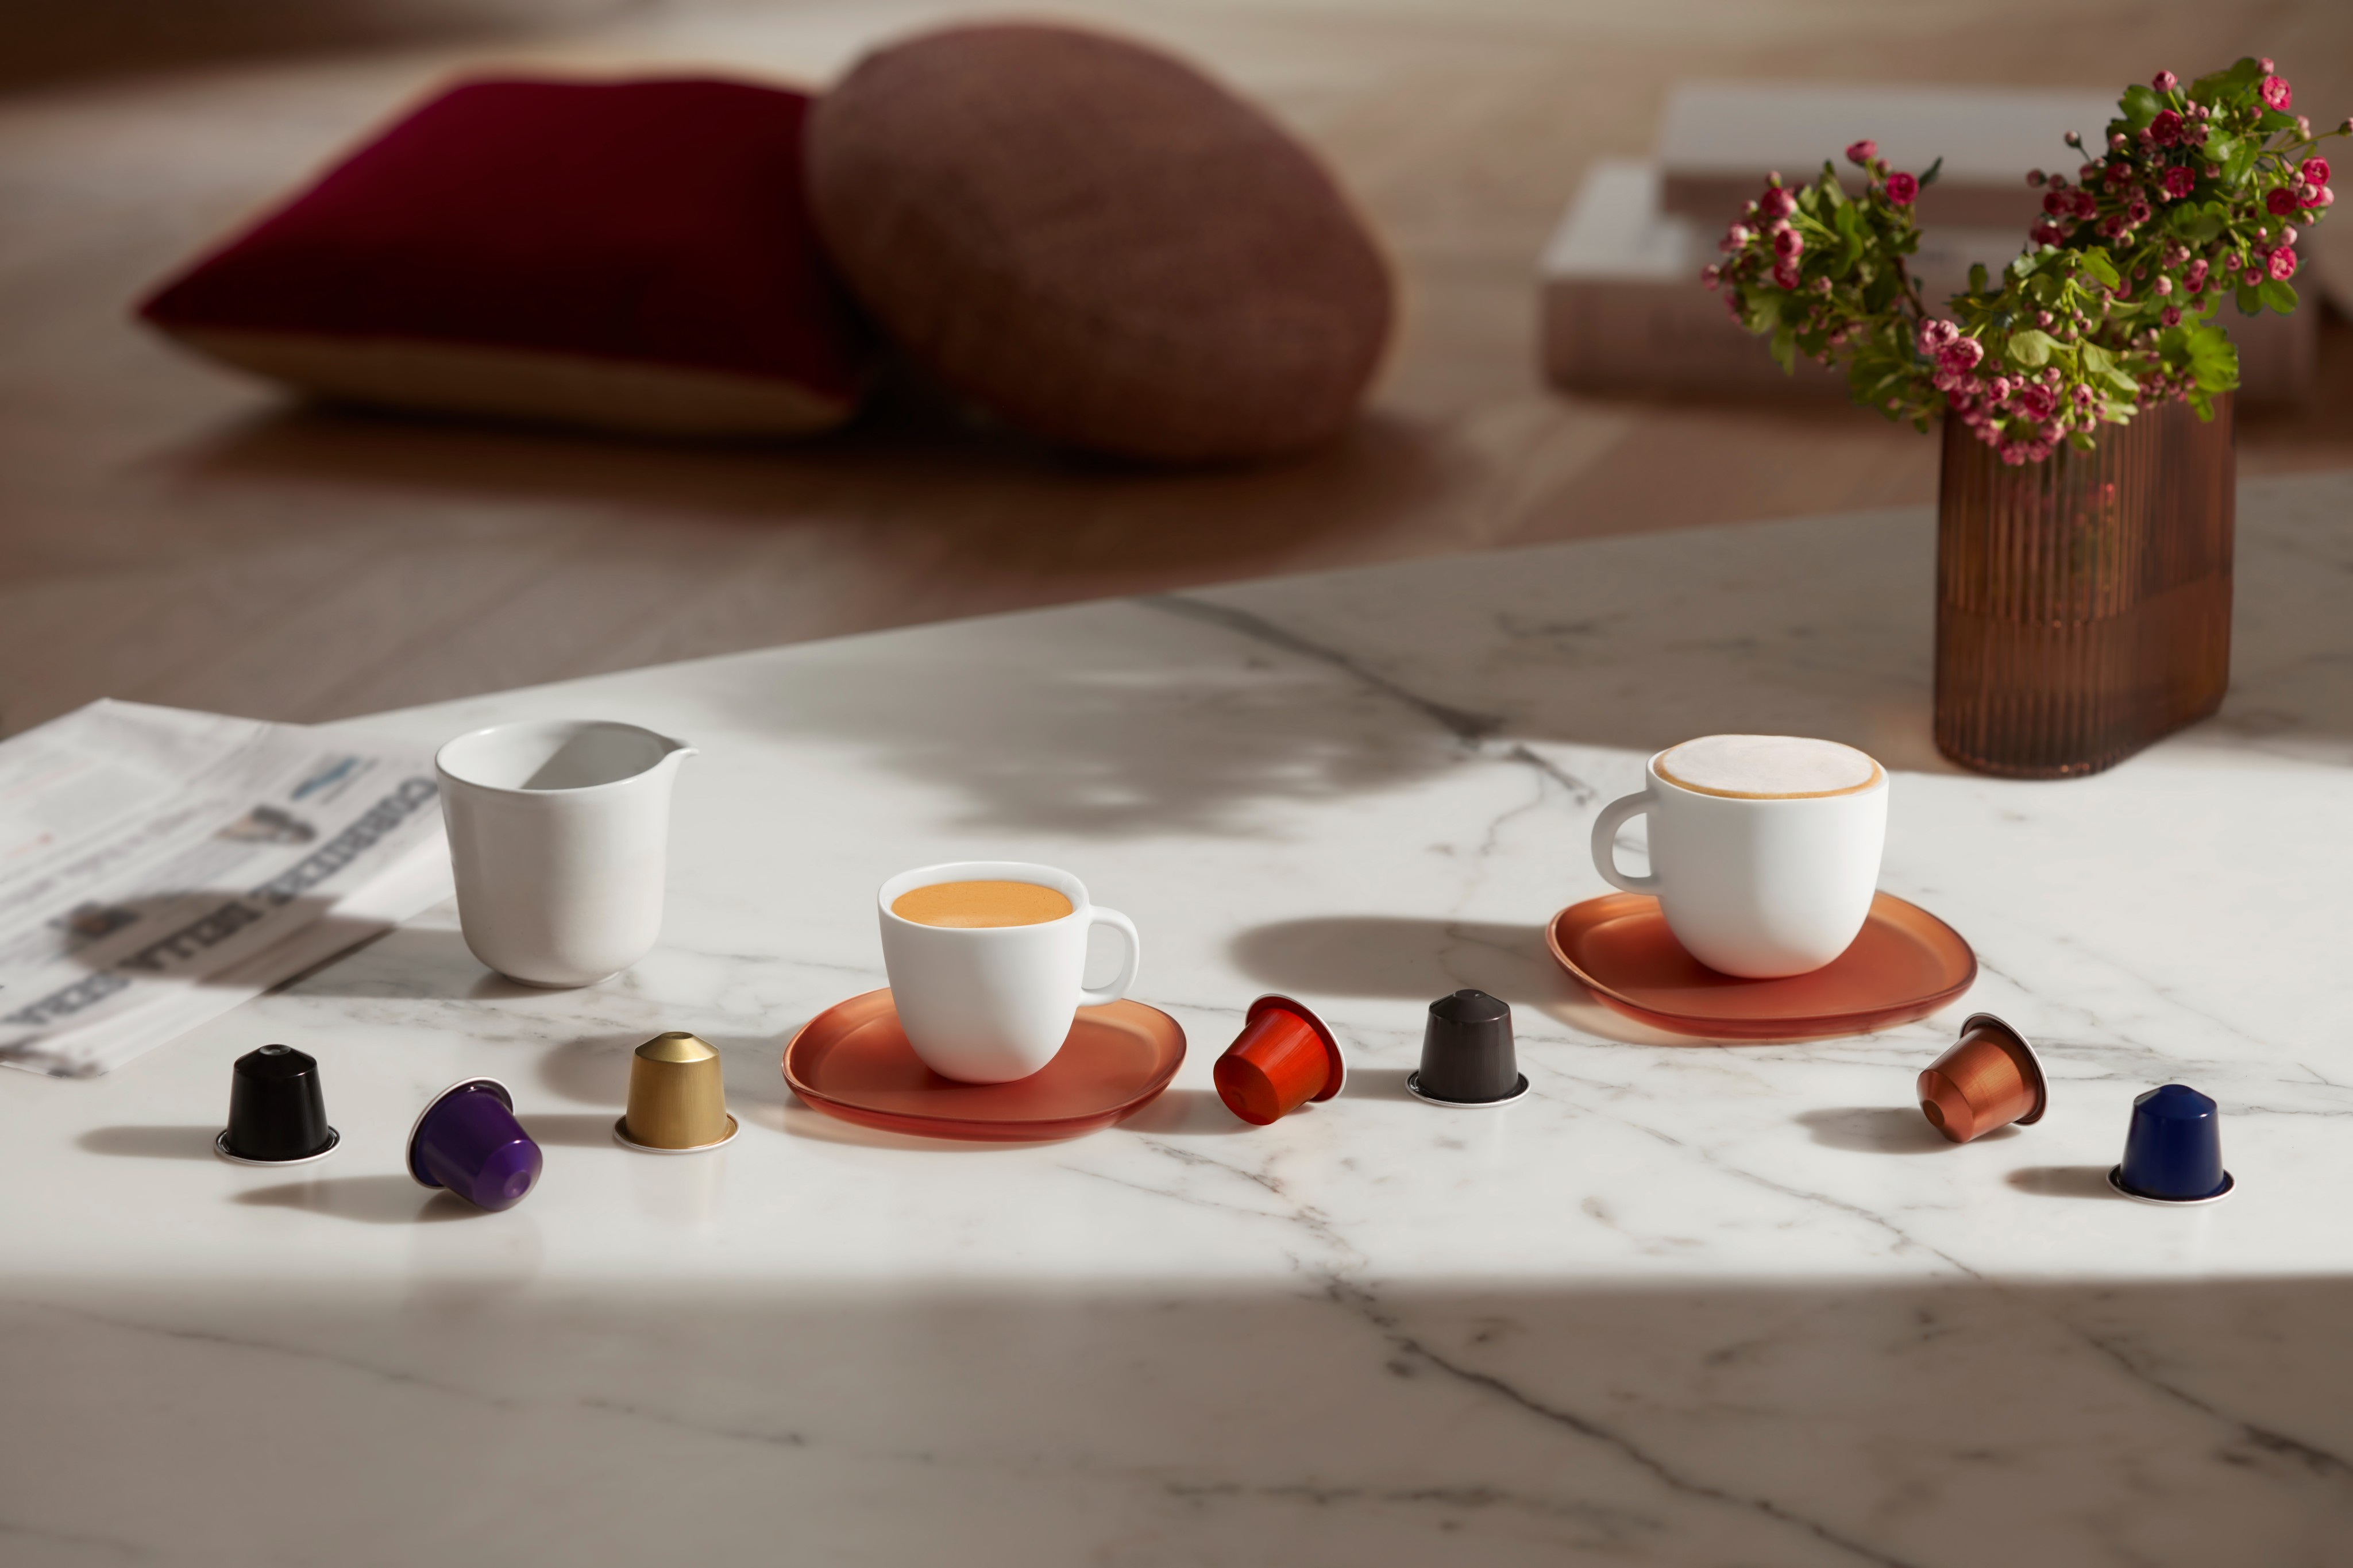 Nespresso – The Subtlety Amid The Flow Of Coffee Culture